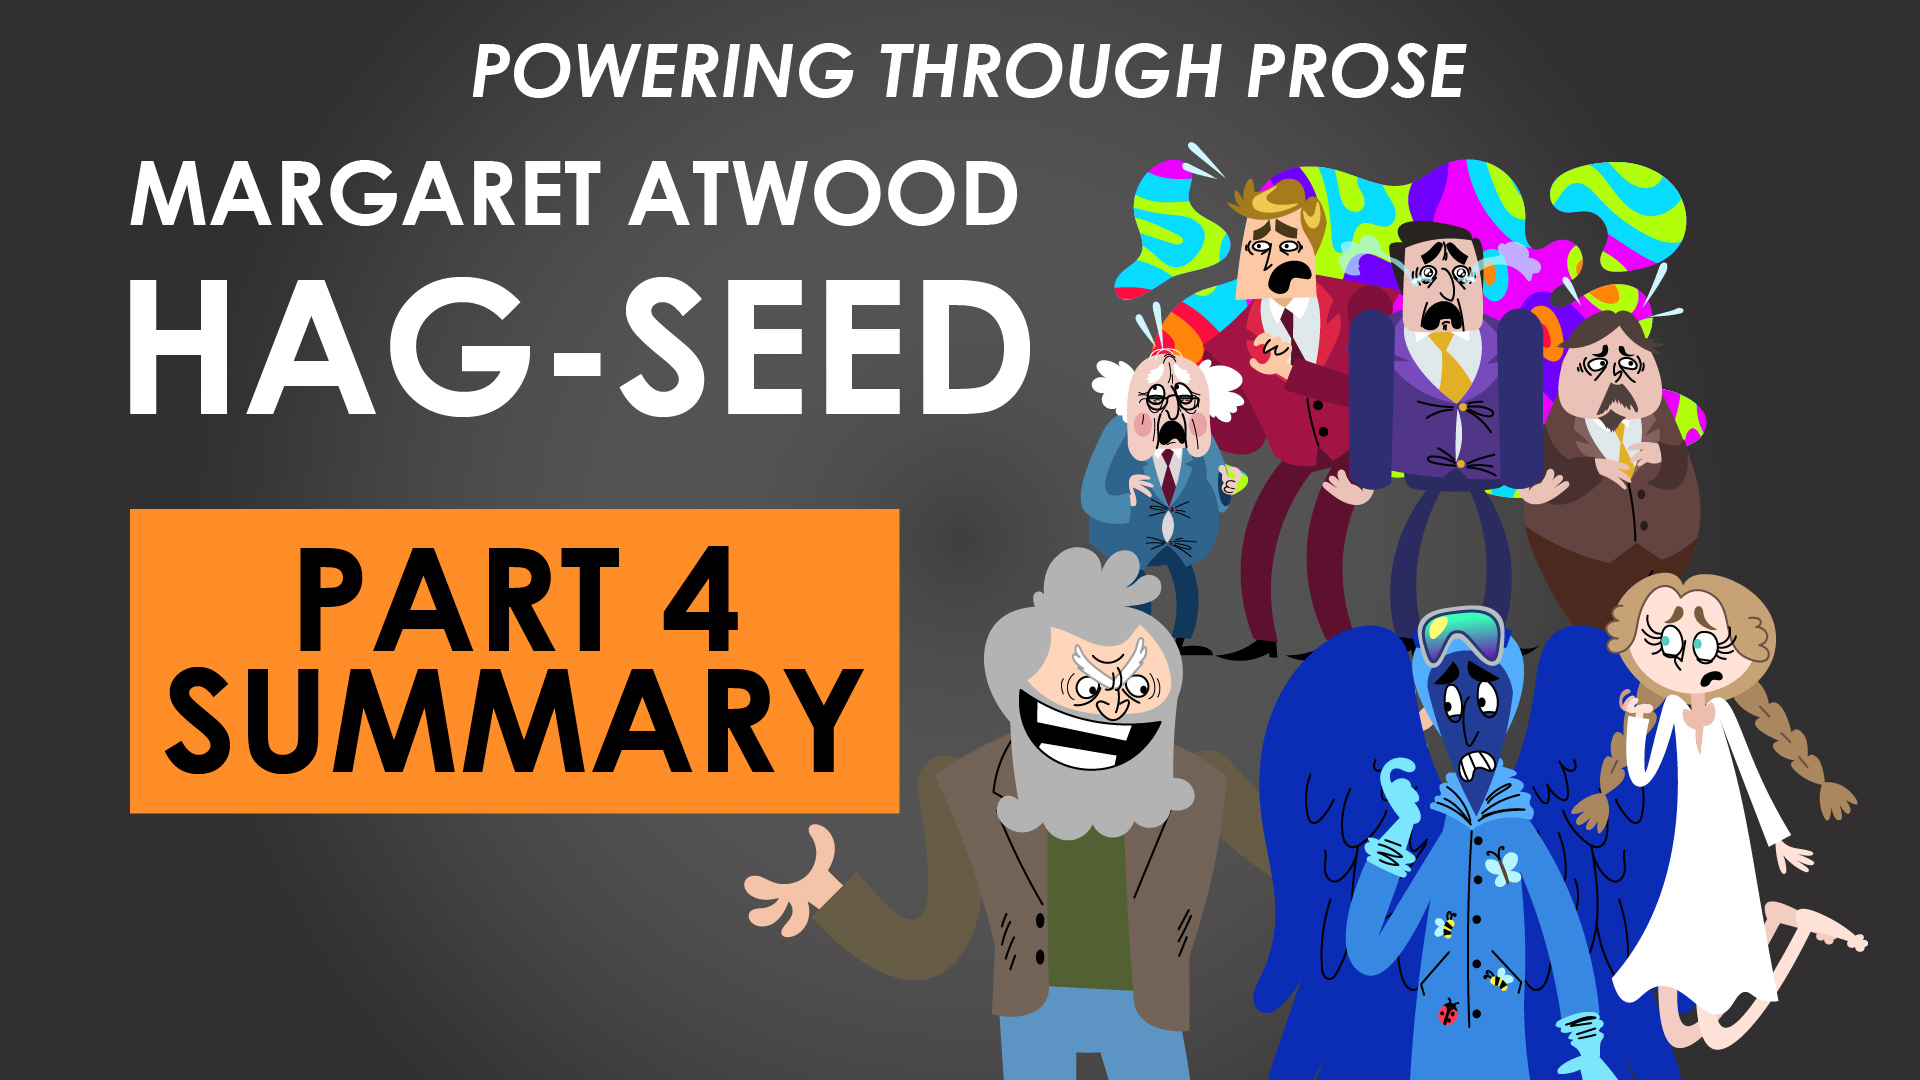 Hag-Seed - Margaret Atwood - Part 4 Summary - Powering through Prose Series